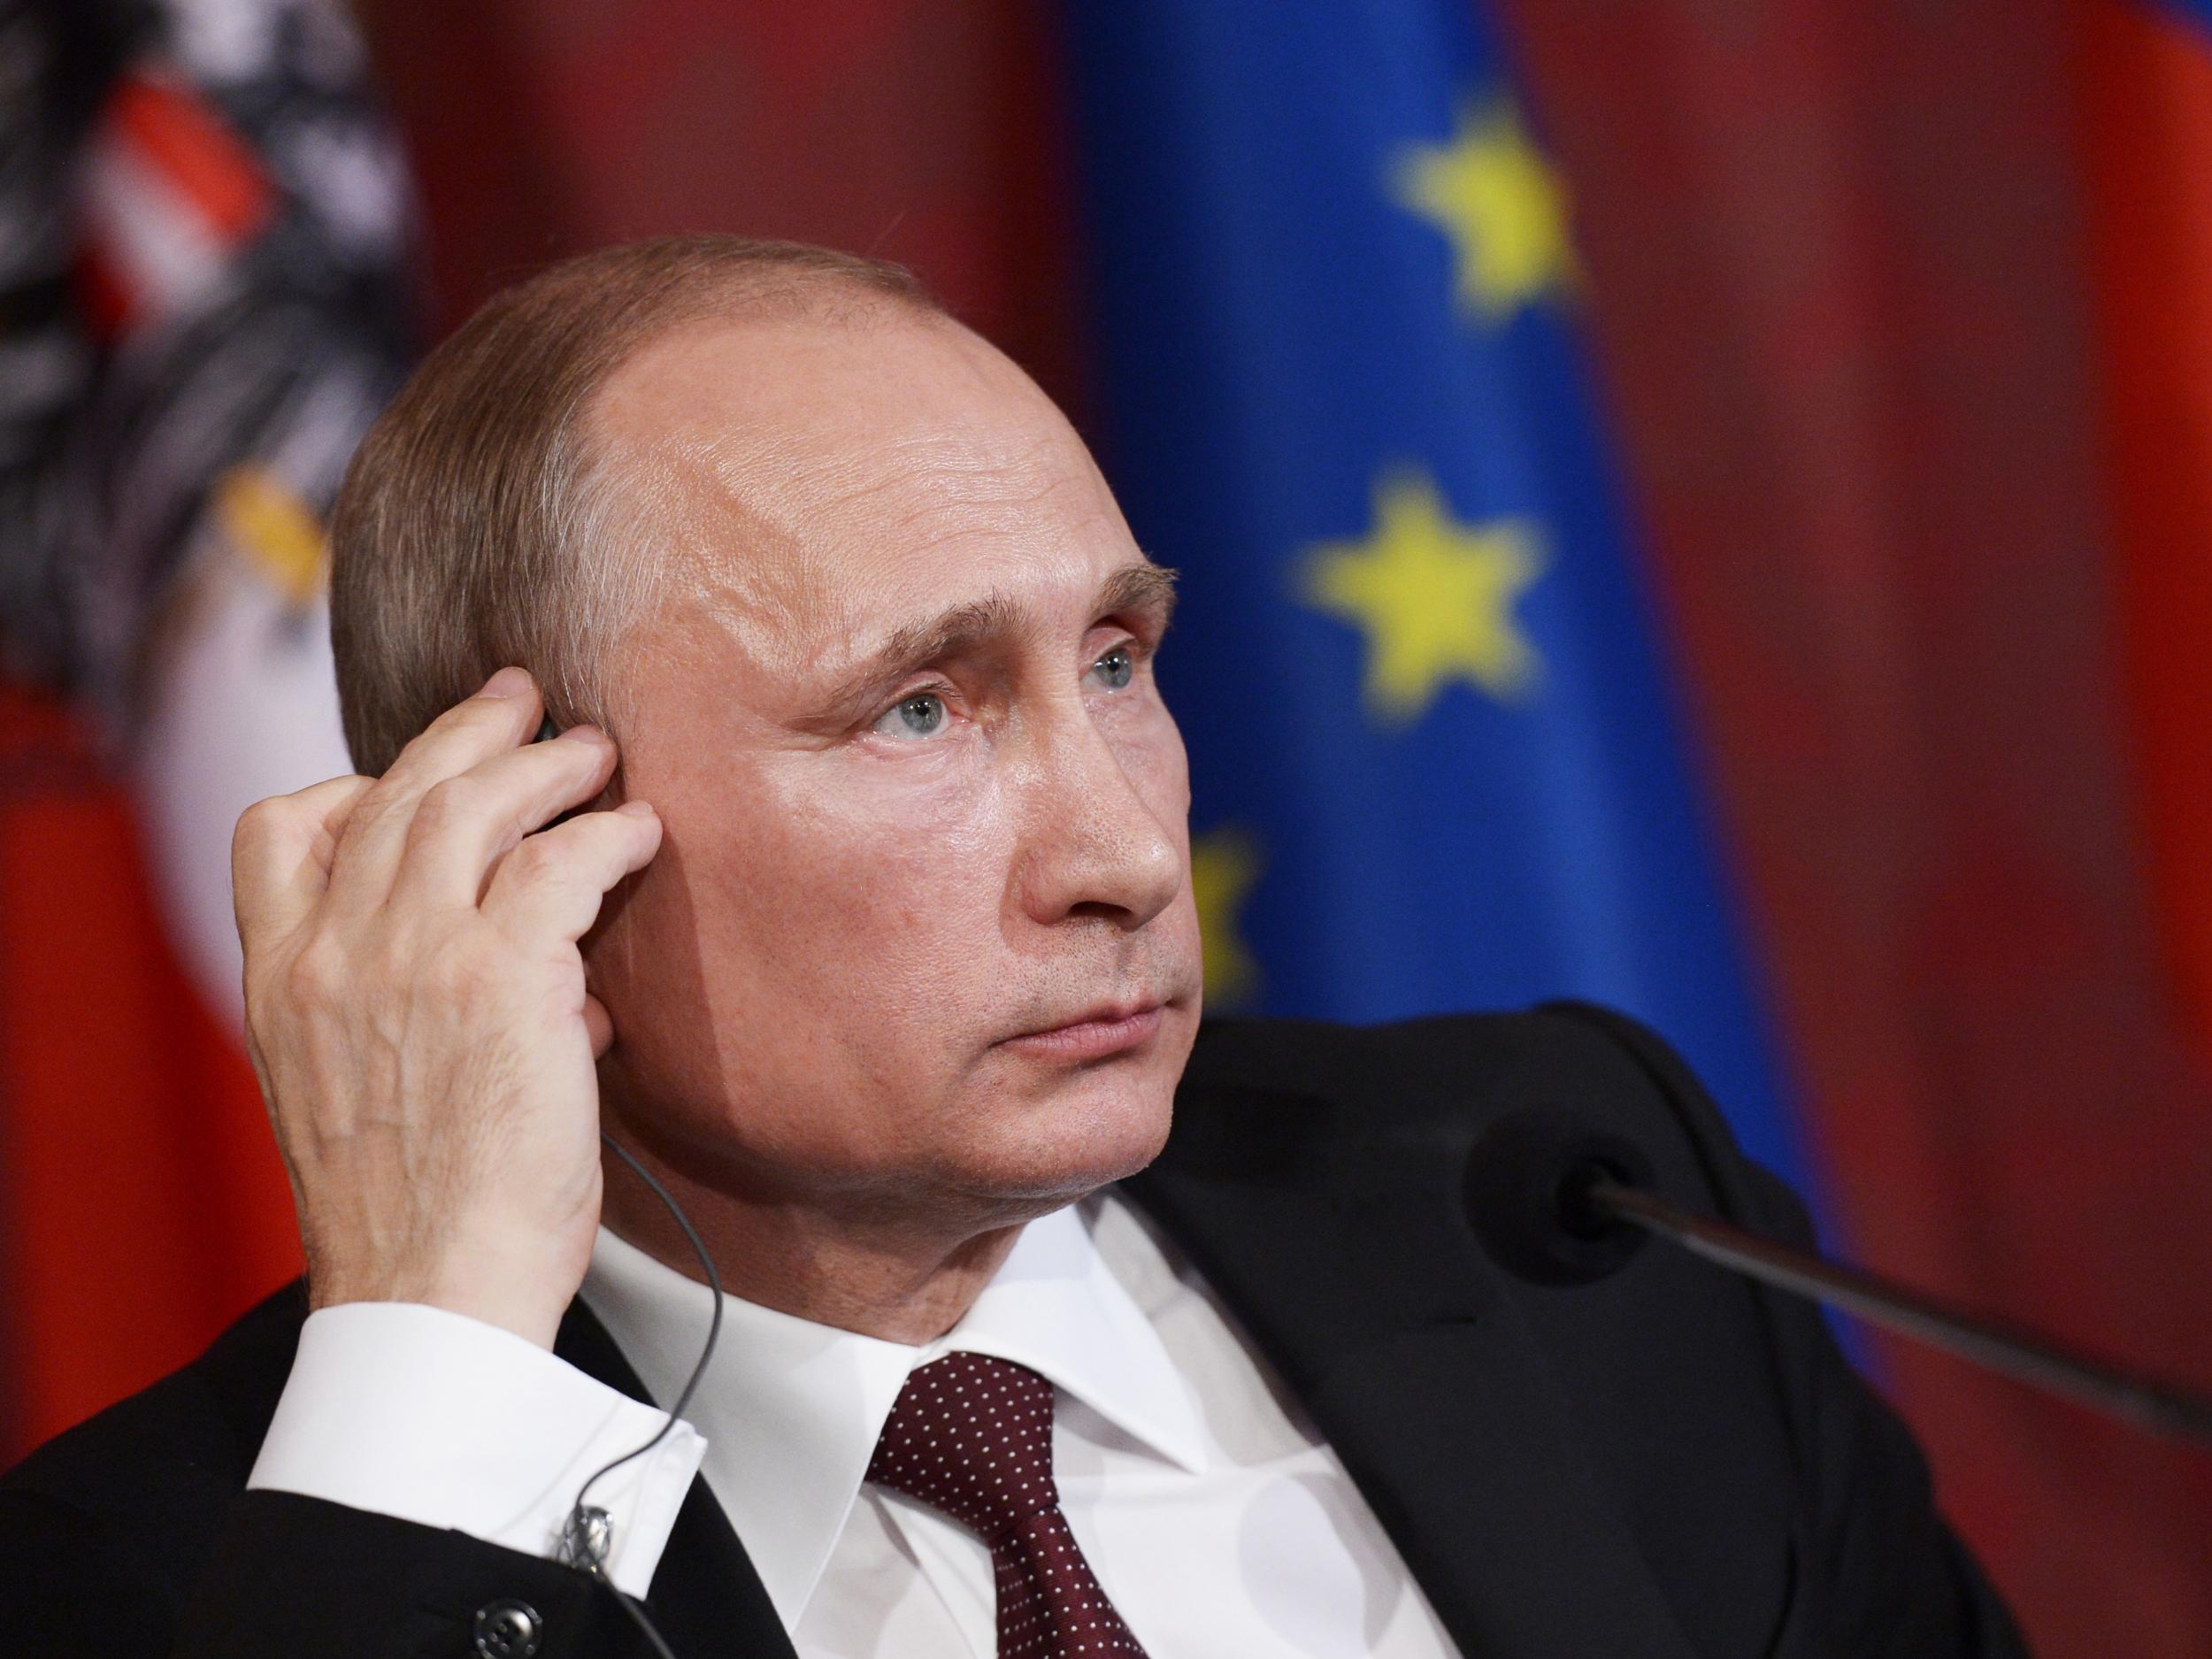 ‘We decide pragmatically whether to cooperate with someone politically,’ says Putin